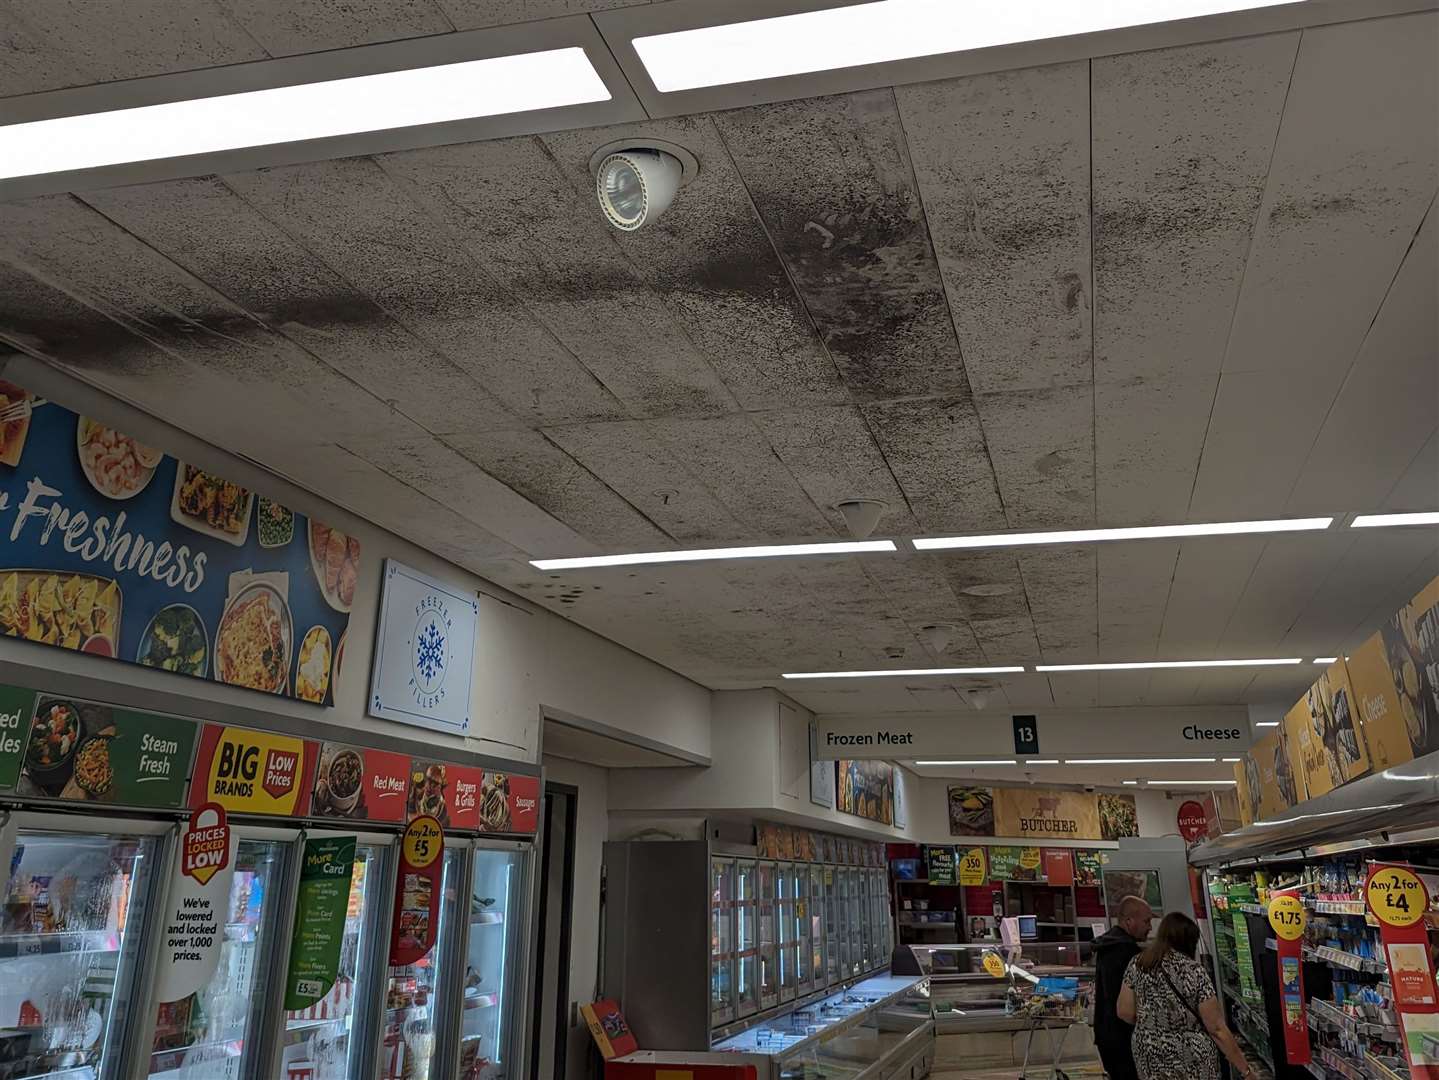 The black mould has been growing for four weeks according to one customer who visits the supermarket every week